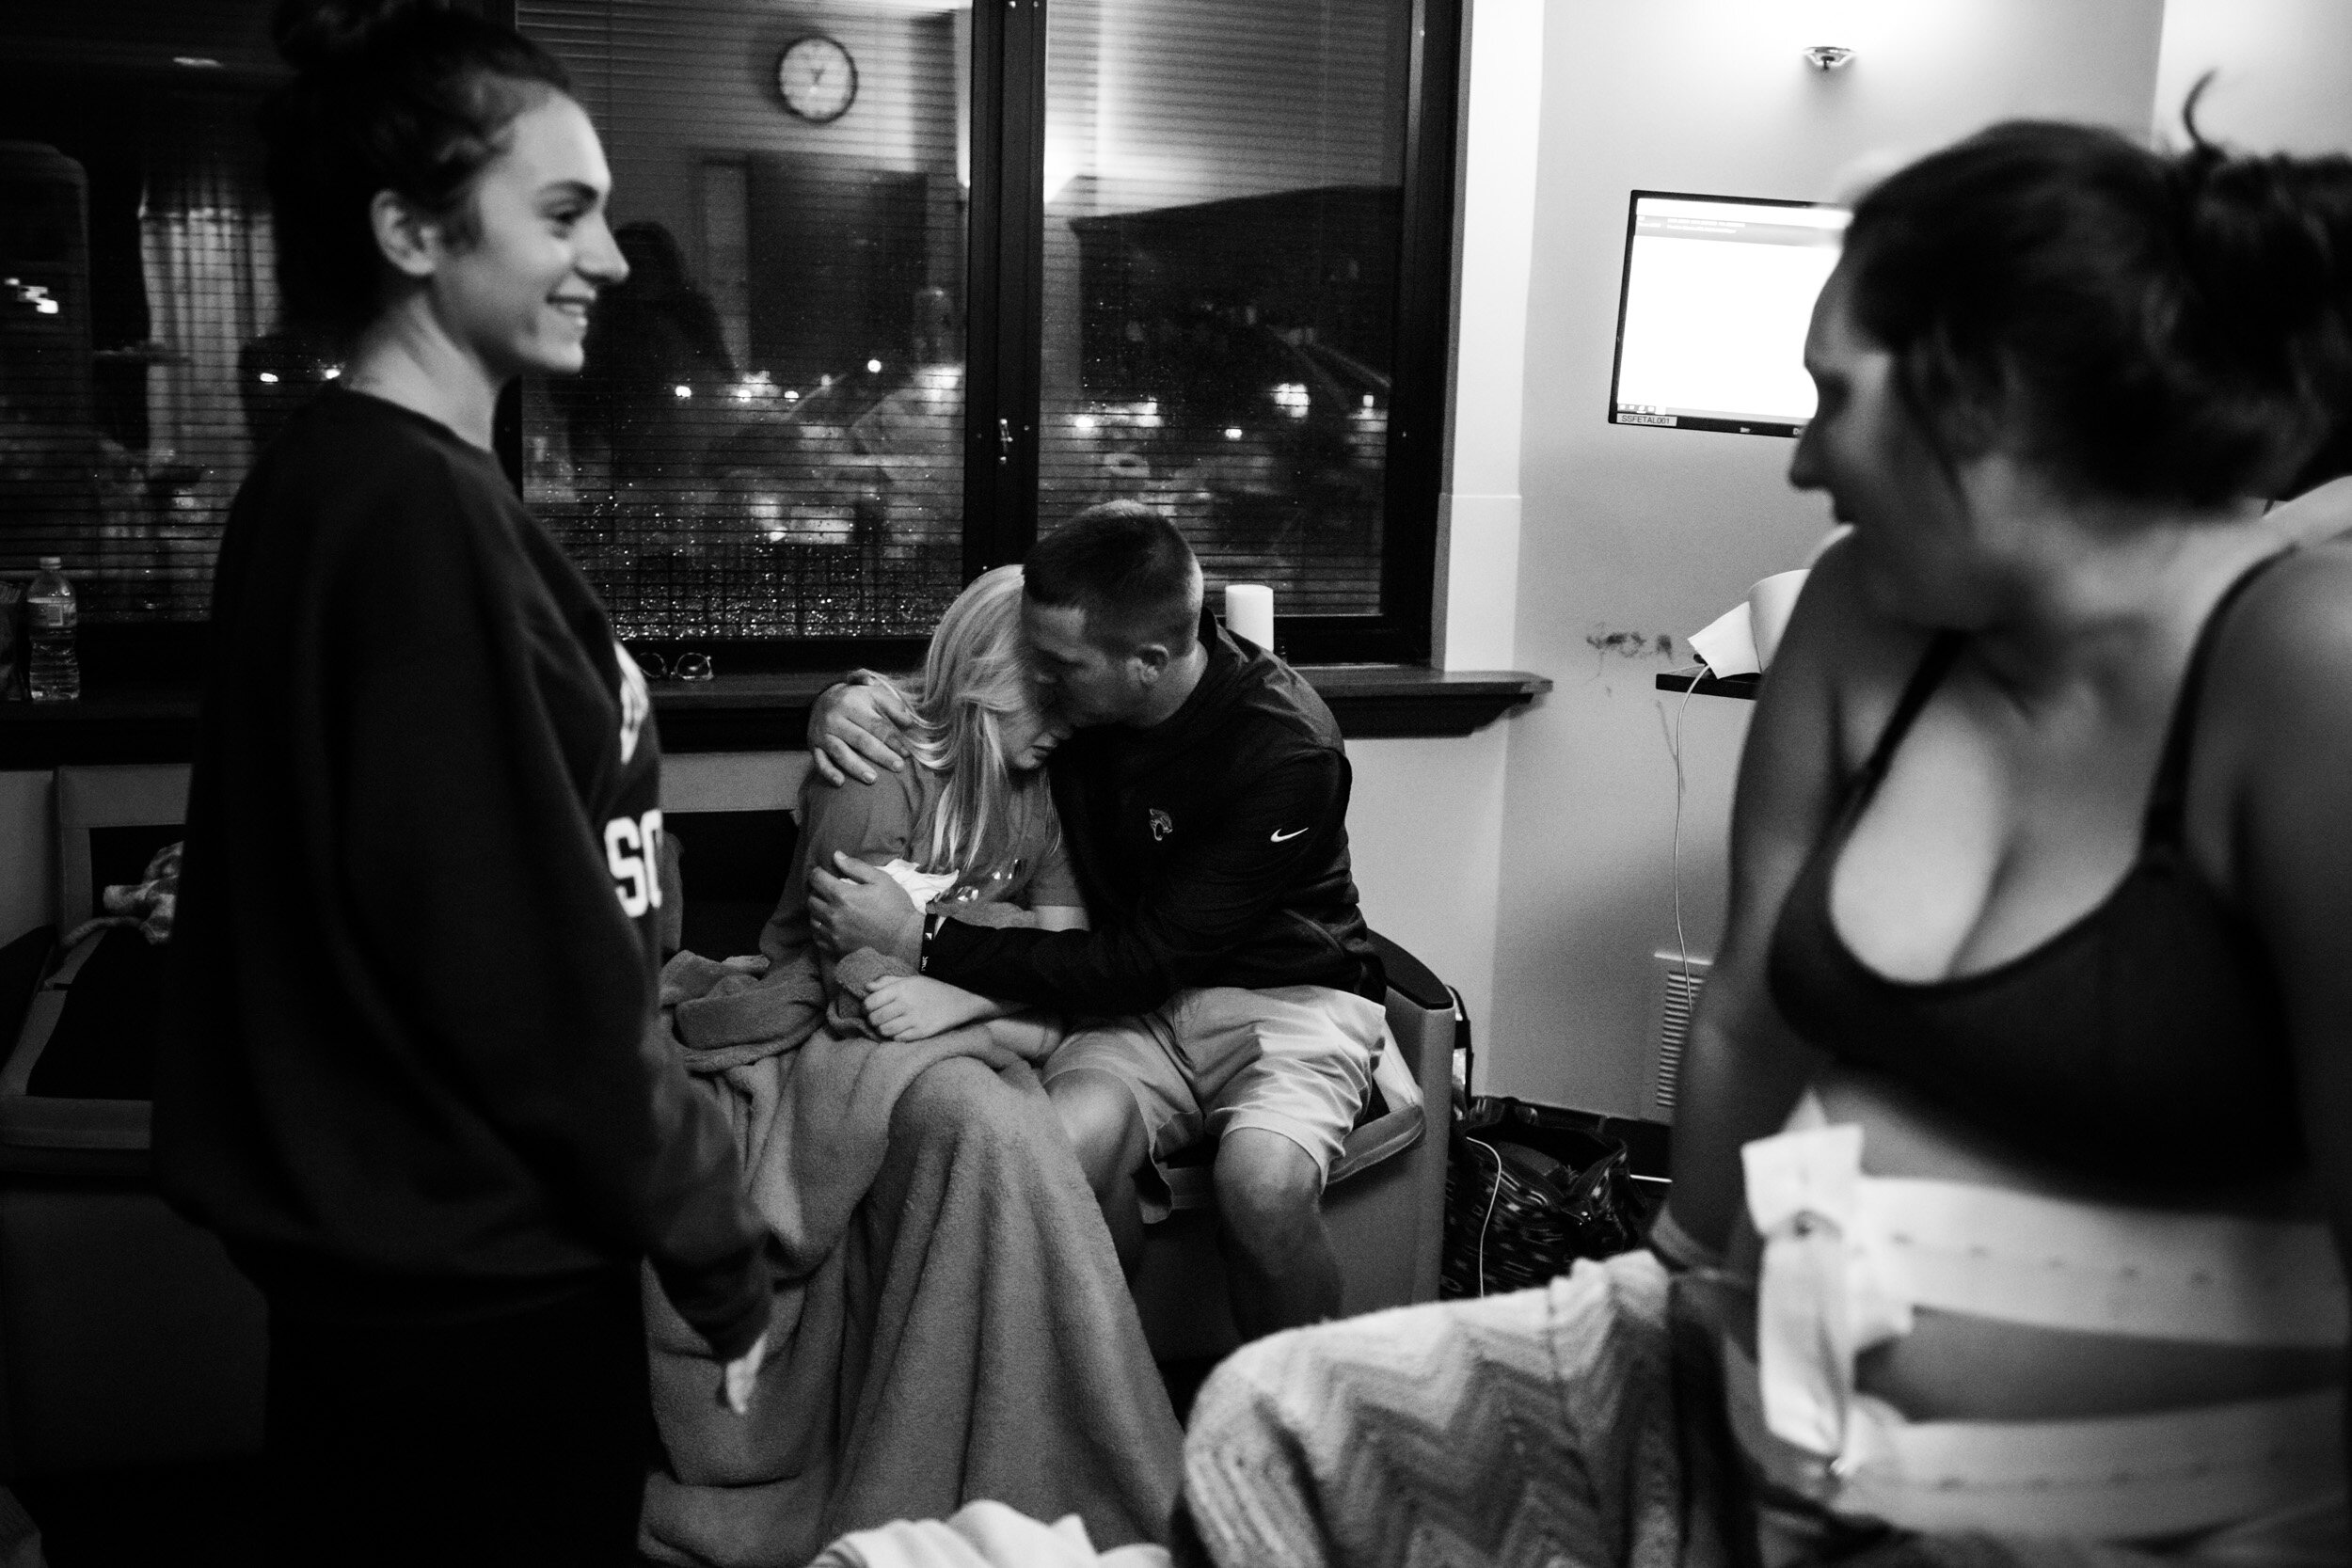 dad comforting his daughter who was crying during mom's labor